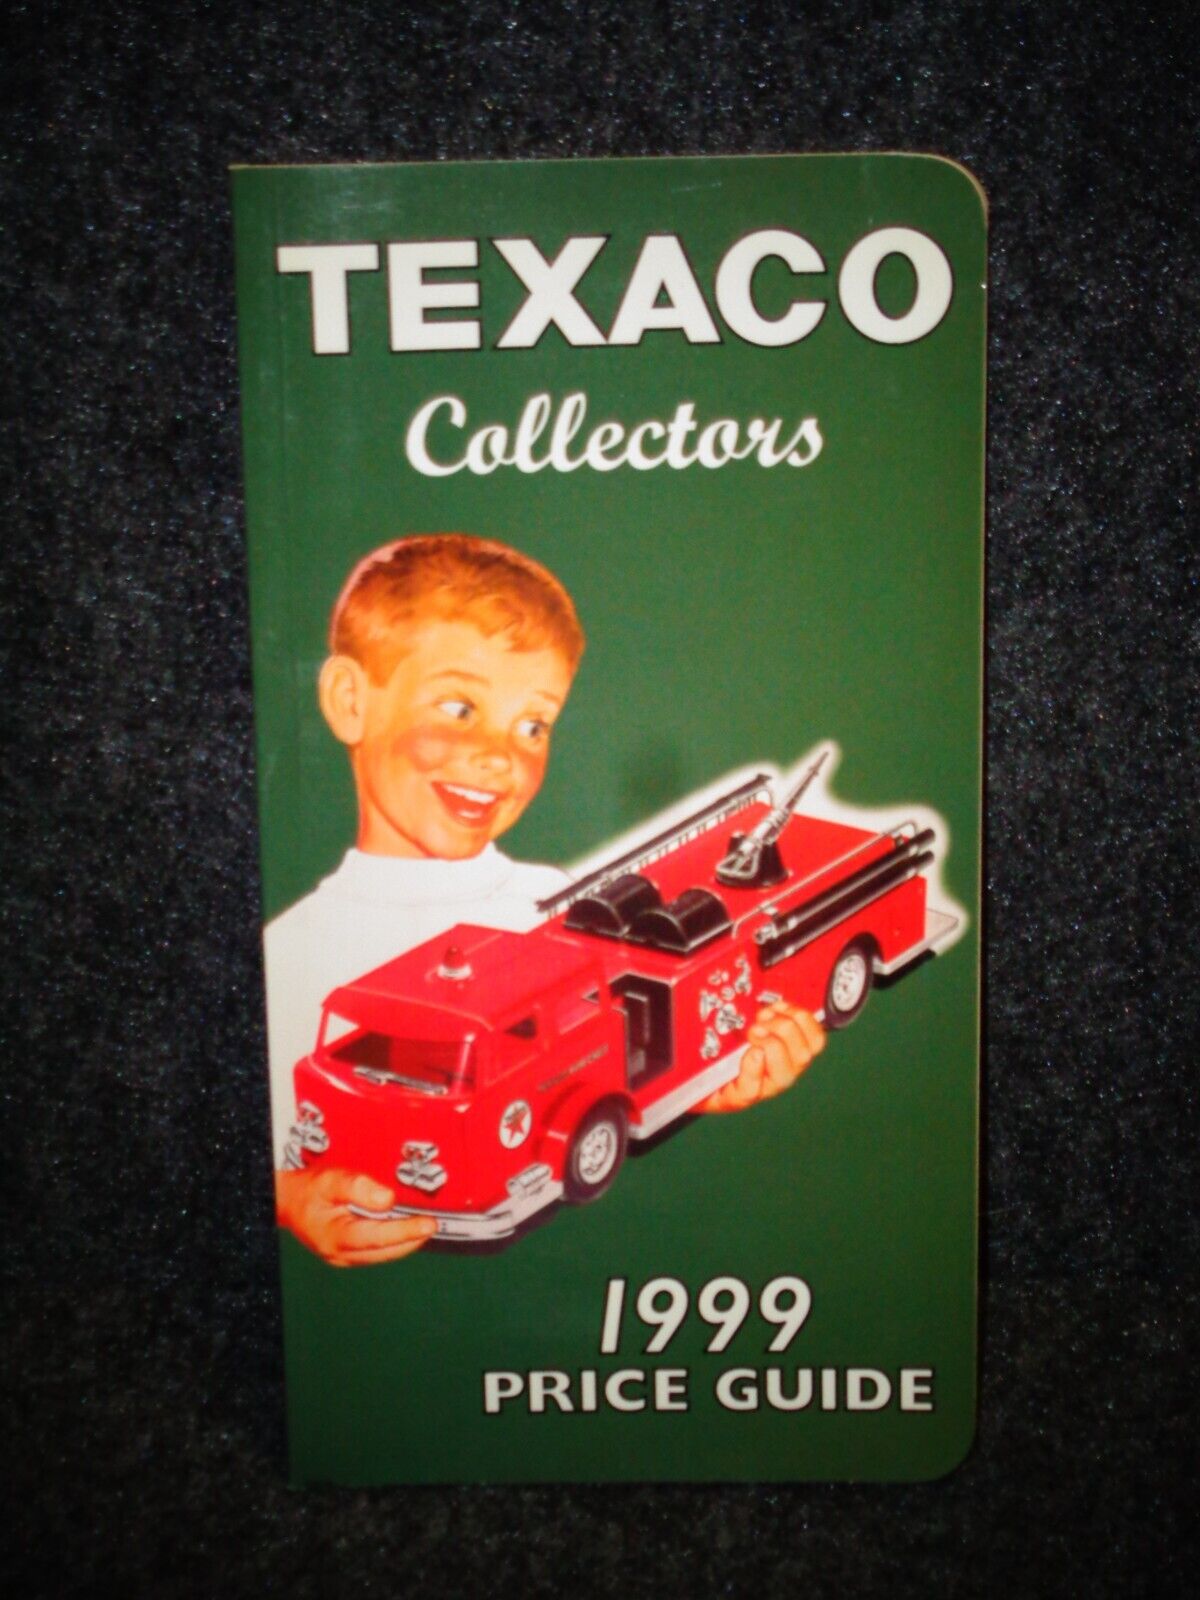 1999 Texaco Truck Price Guide Toy Truck Collector Fire Chief Texaco Sky Chief